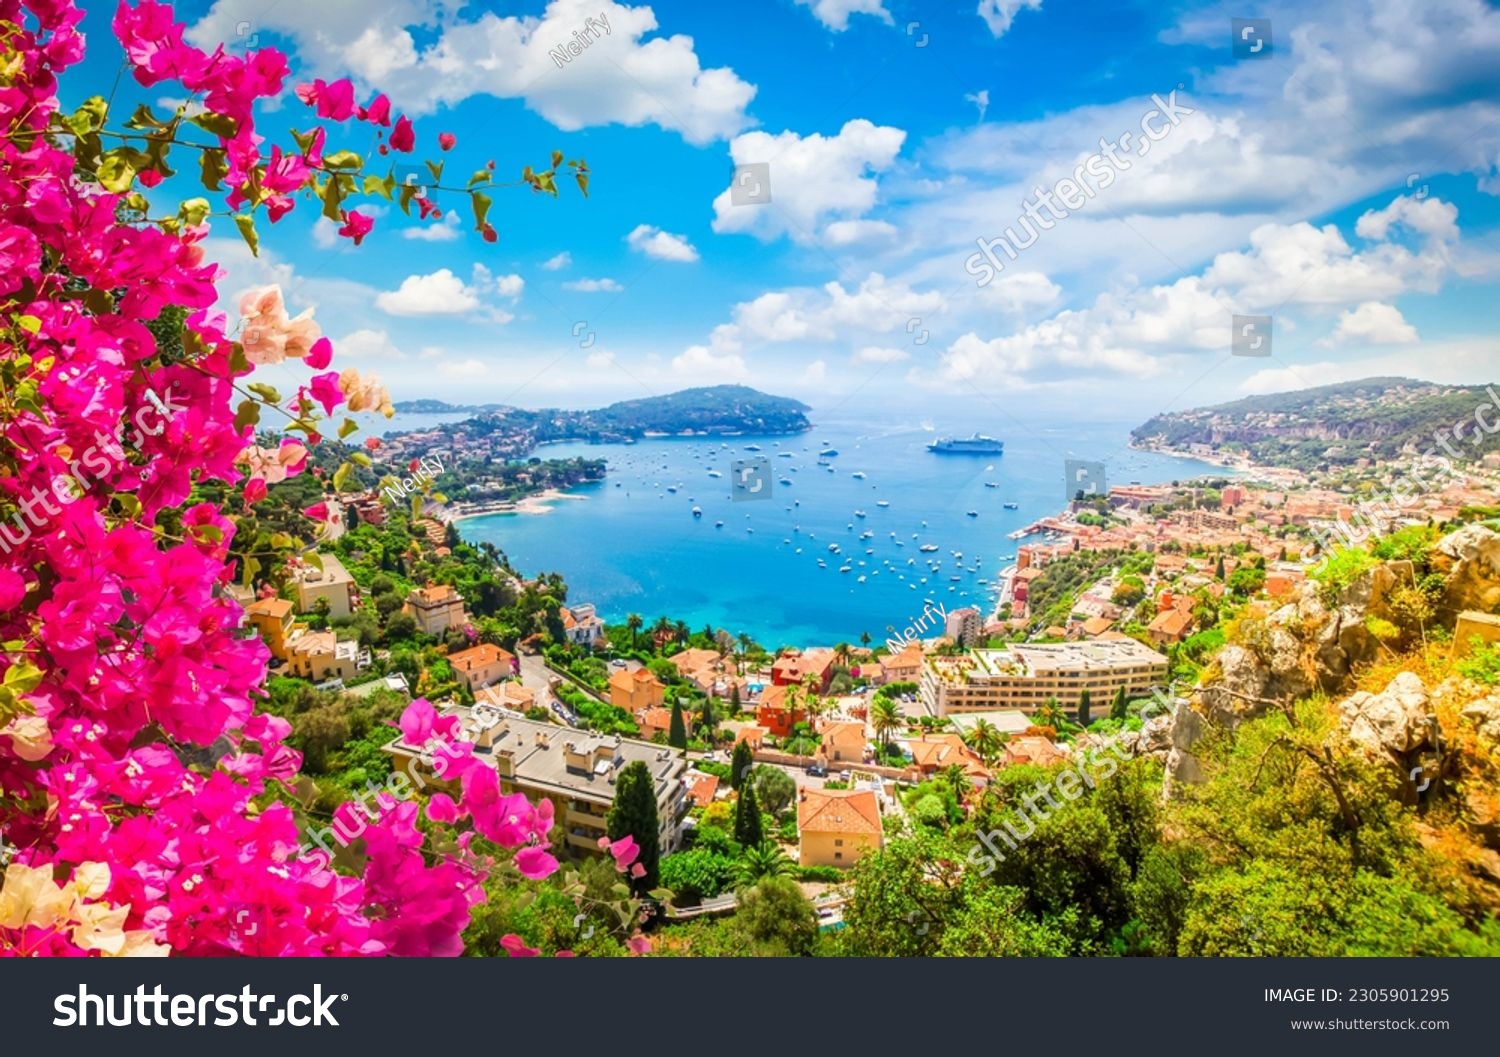 beautiful lanscape of riviera coast and turquiose water of cote dAzur at summer day, France #2305901295